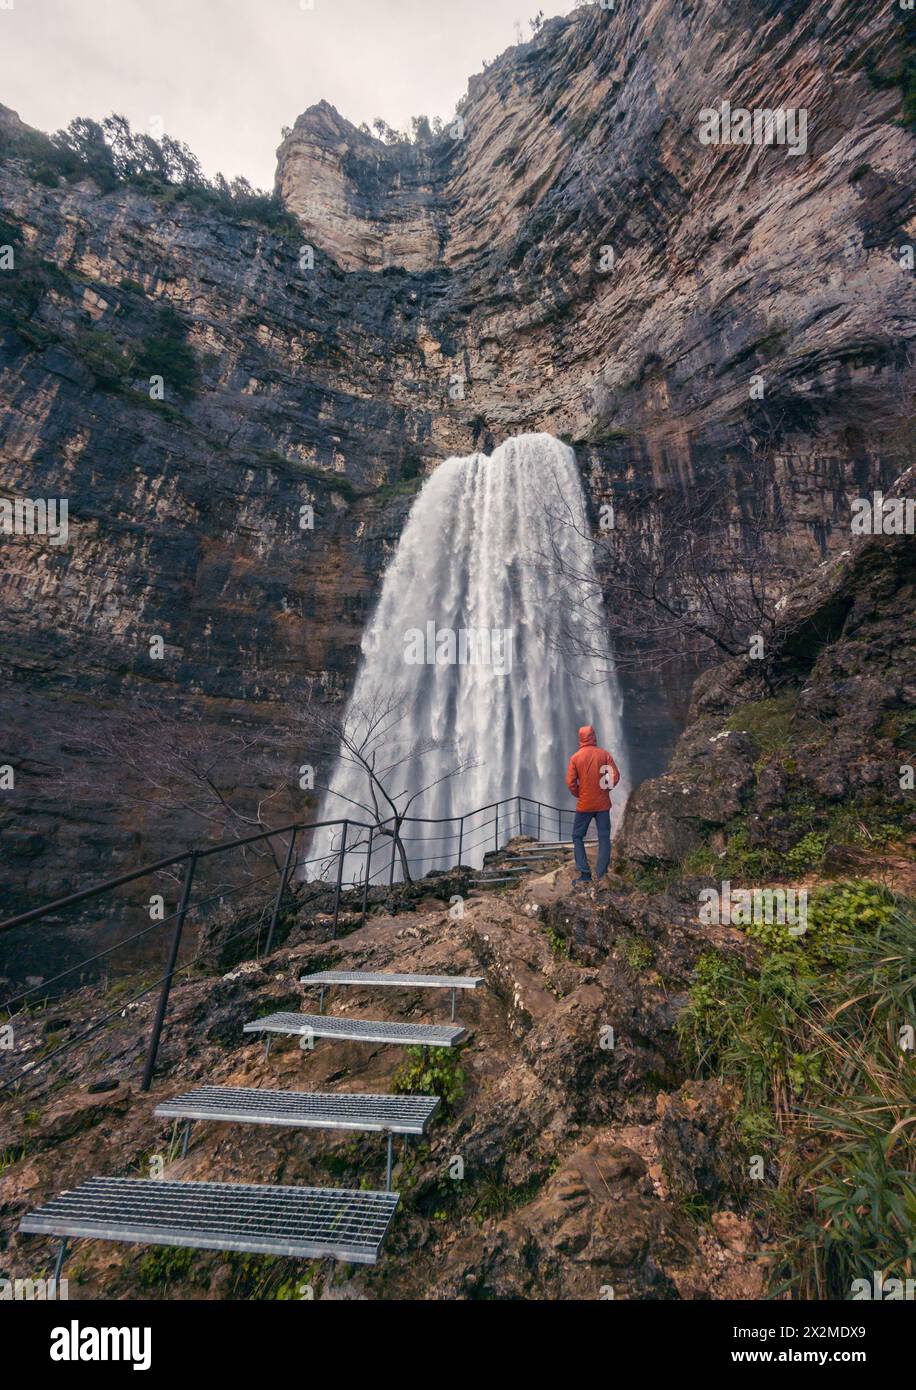 A person in orange observes the majestic Reventón waterfall at Rio Mundo's source Stock Photo